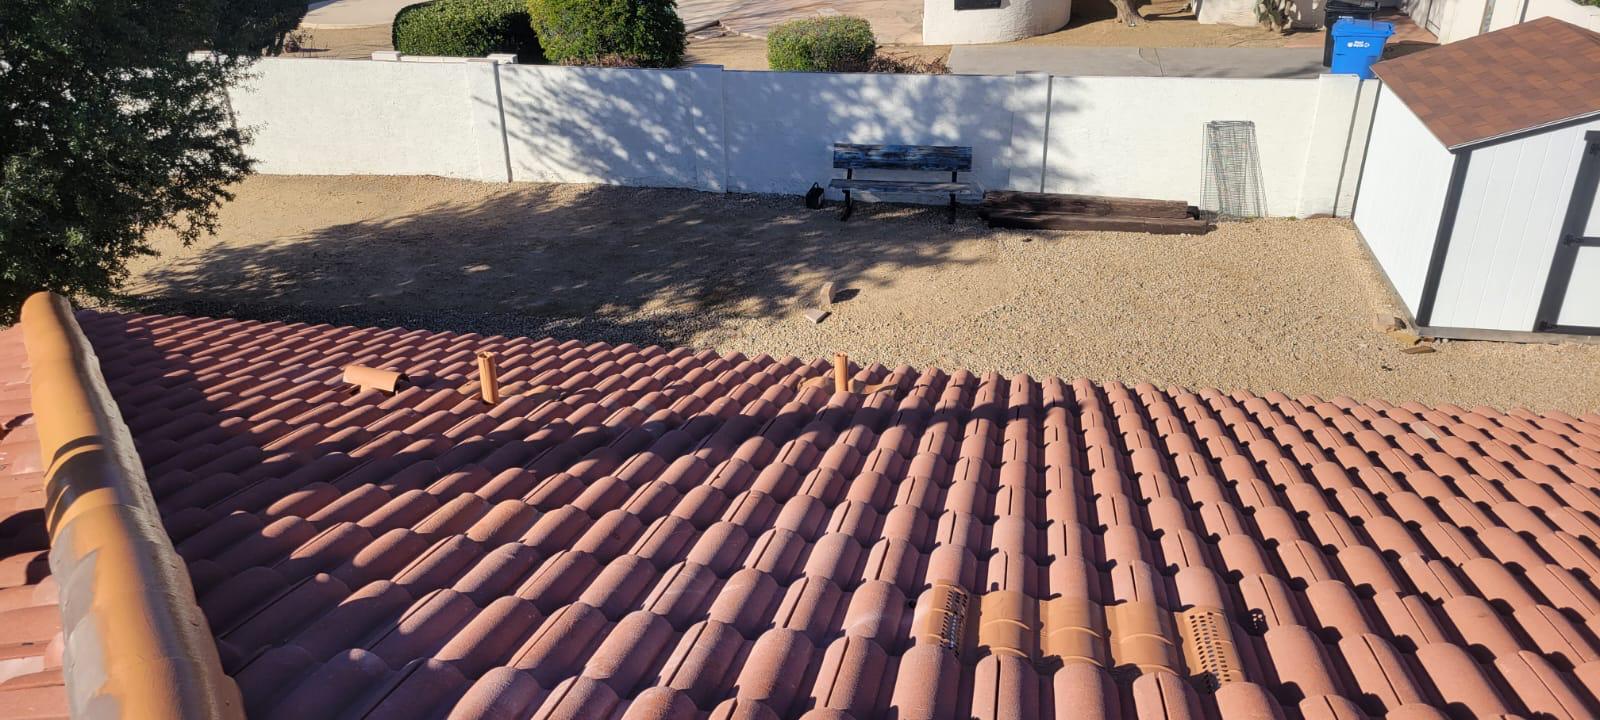 The finished tile re-felt work by Behmer Roofing adds to the charm of this Gilbert home's elegant exterior.